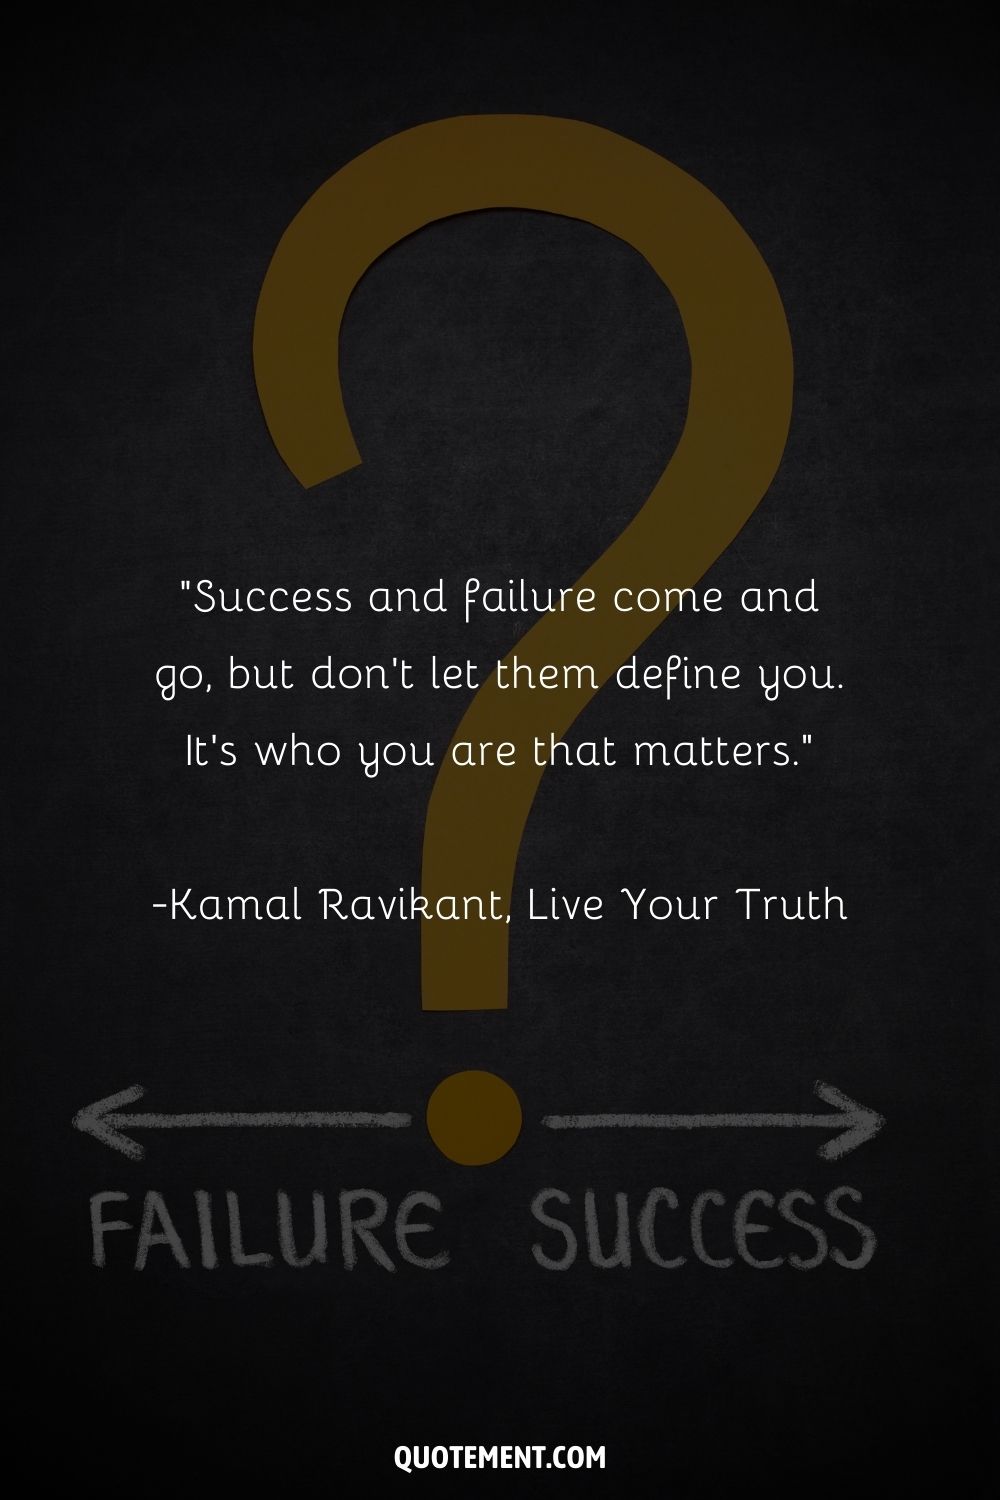 “Success and failure come and go, but don't let them define you. It's who you are that matters.” ― Kamal Ravikant, Live Your Truth